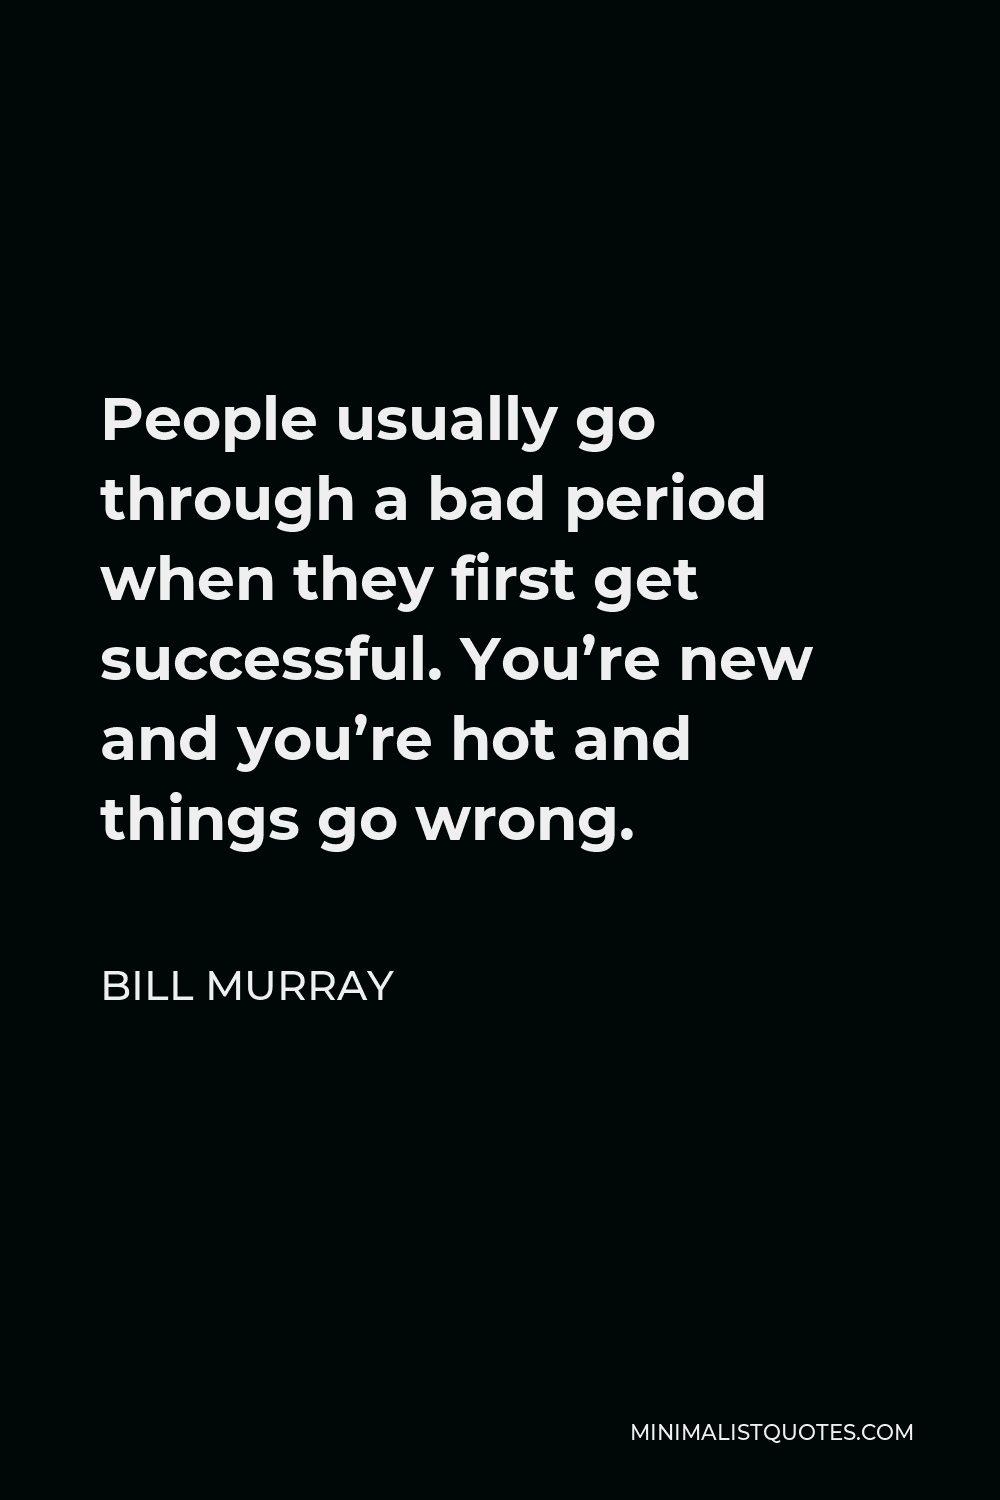 Bill Murray Quote - People usually go through a bad period when they first get successful. You’re new and you’re hot and things go wrong.